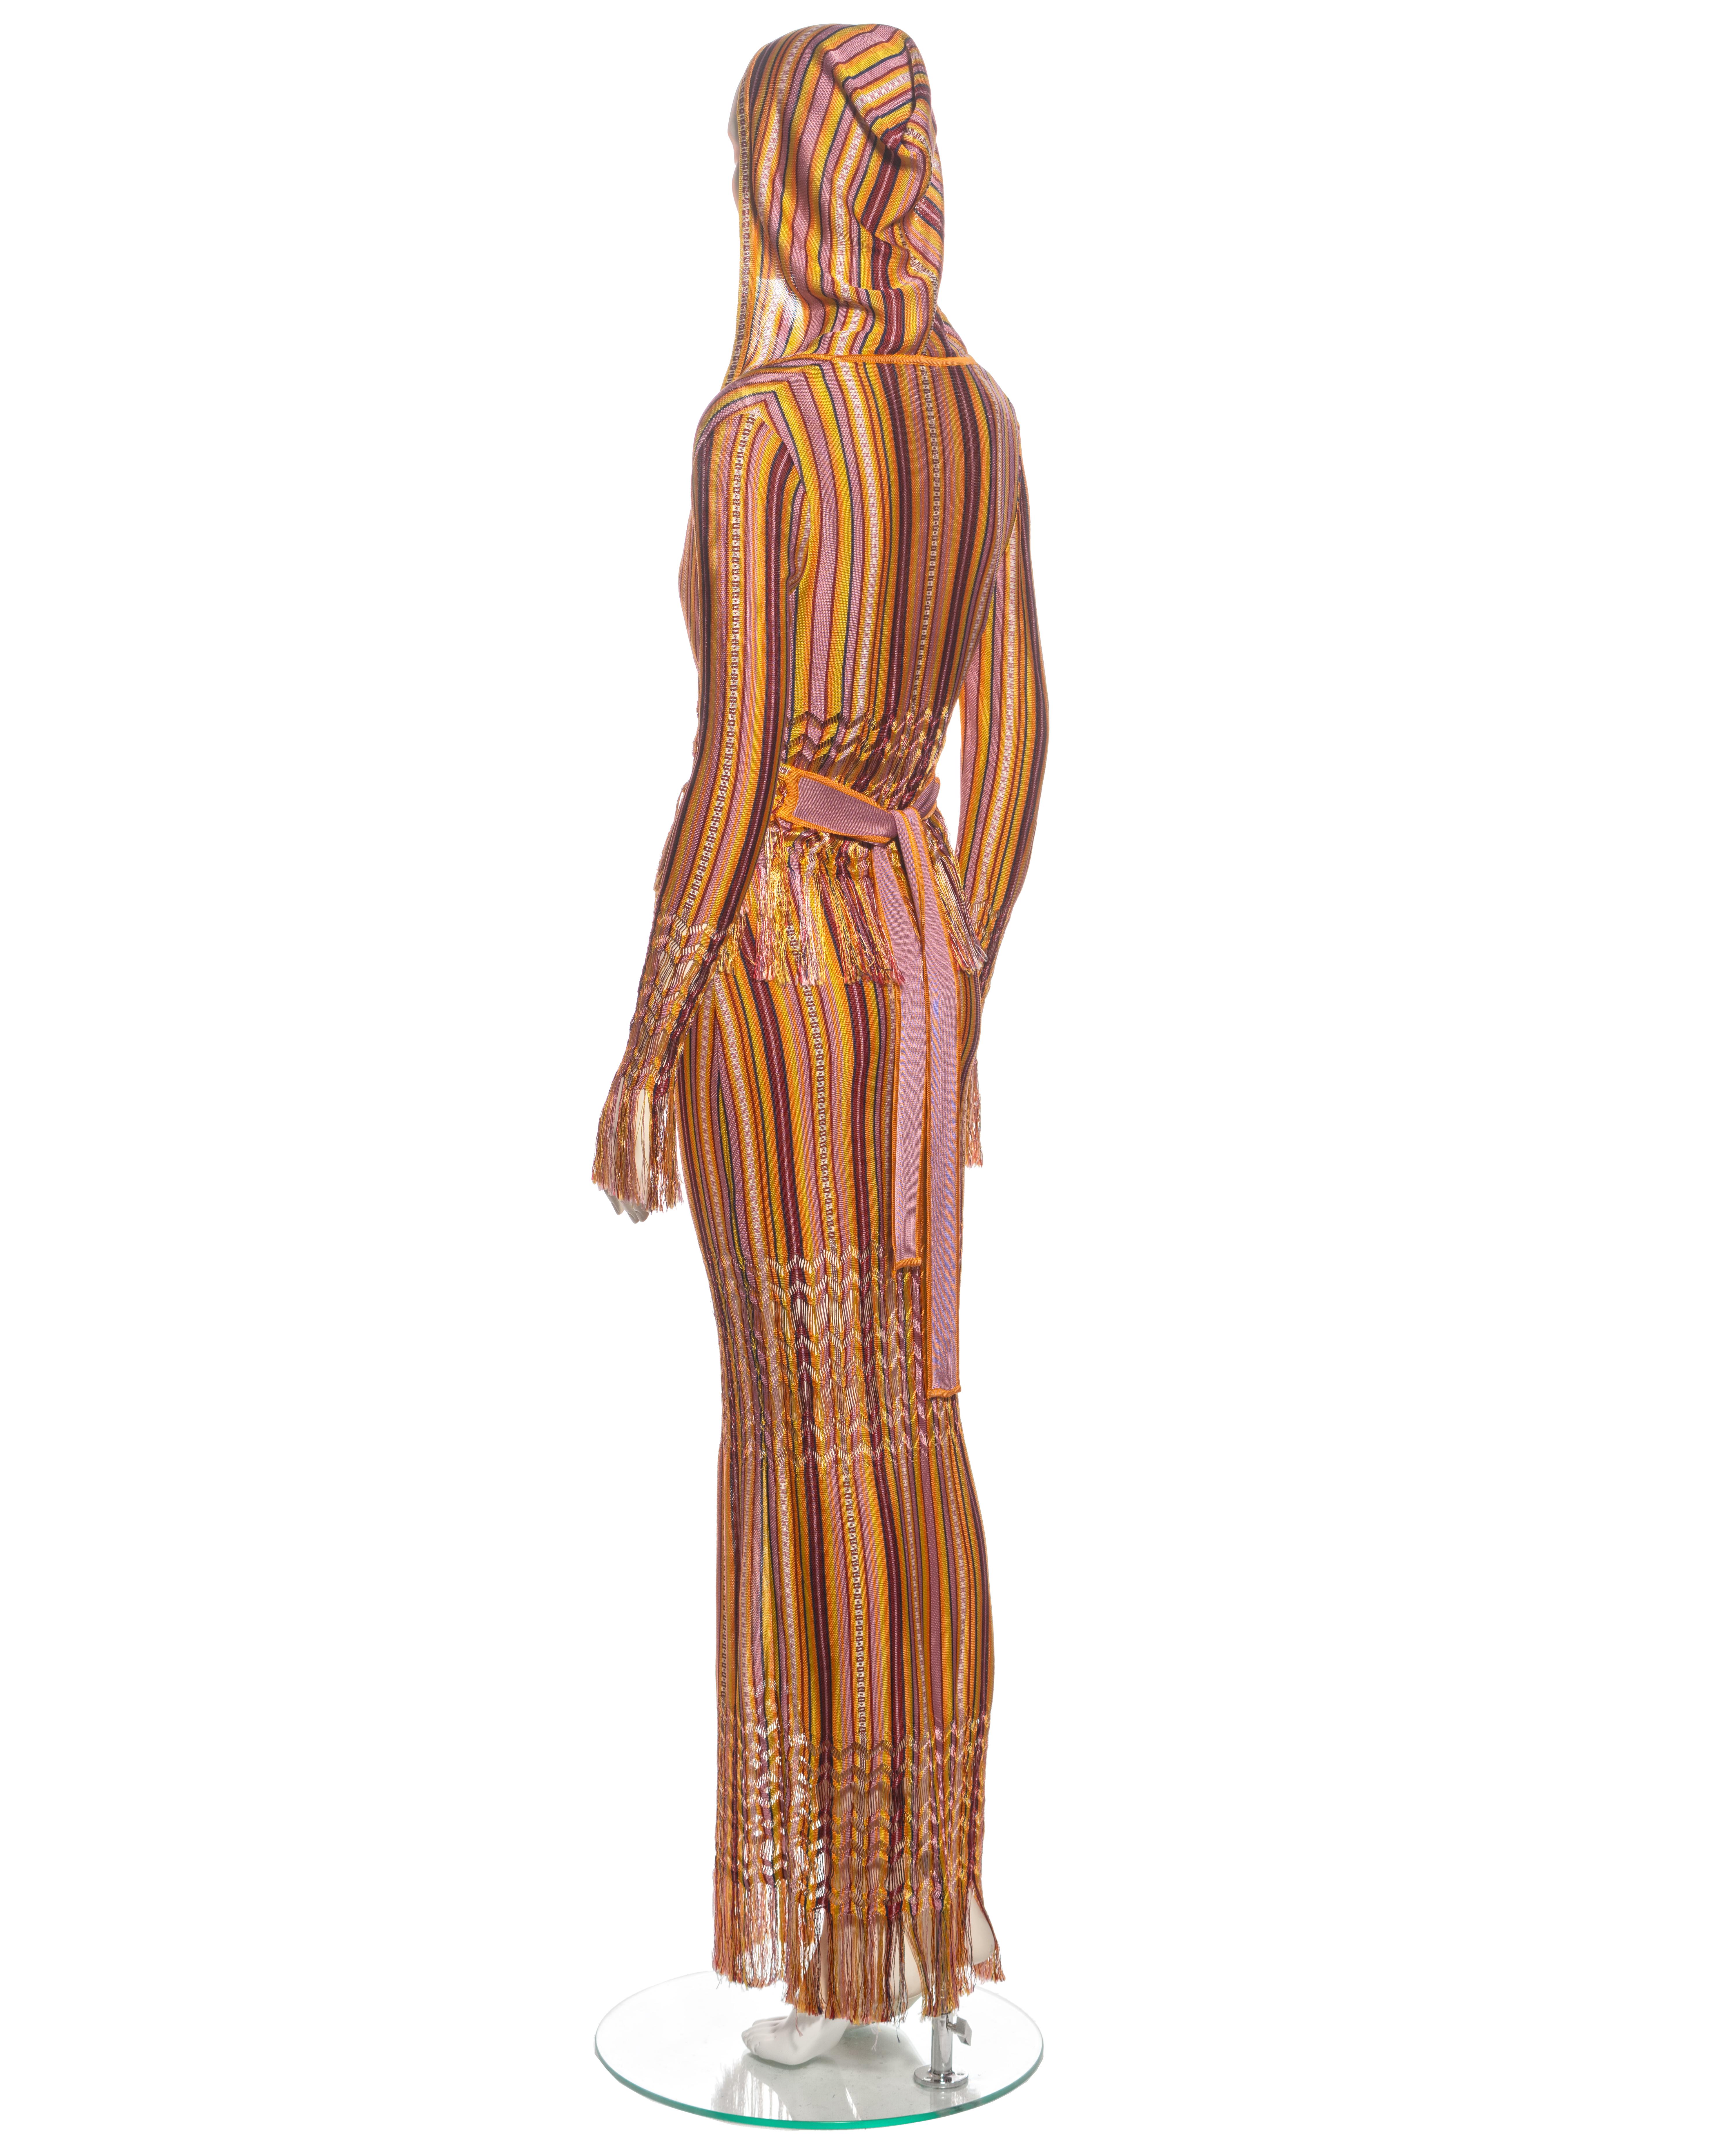 Christian Dior by John Galliano Striped Knit Maxi Dress and Cardigan, ss 2002 For Sale 12